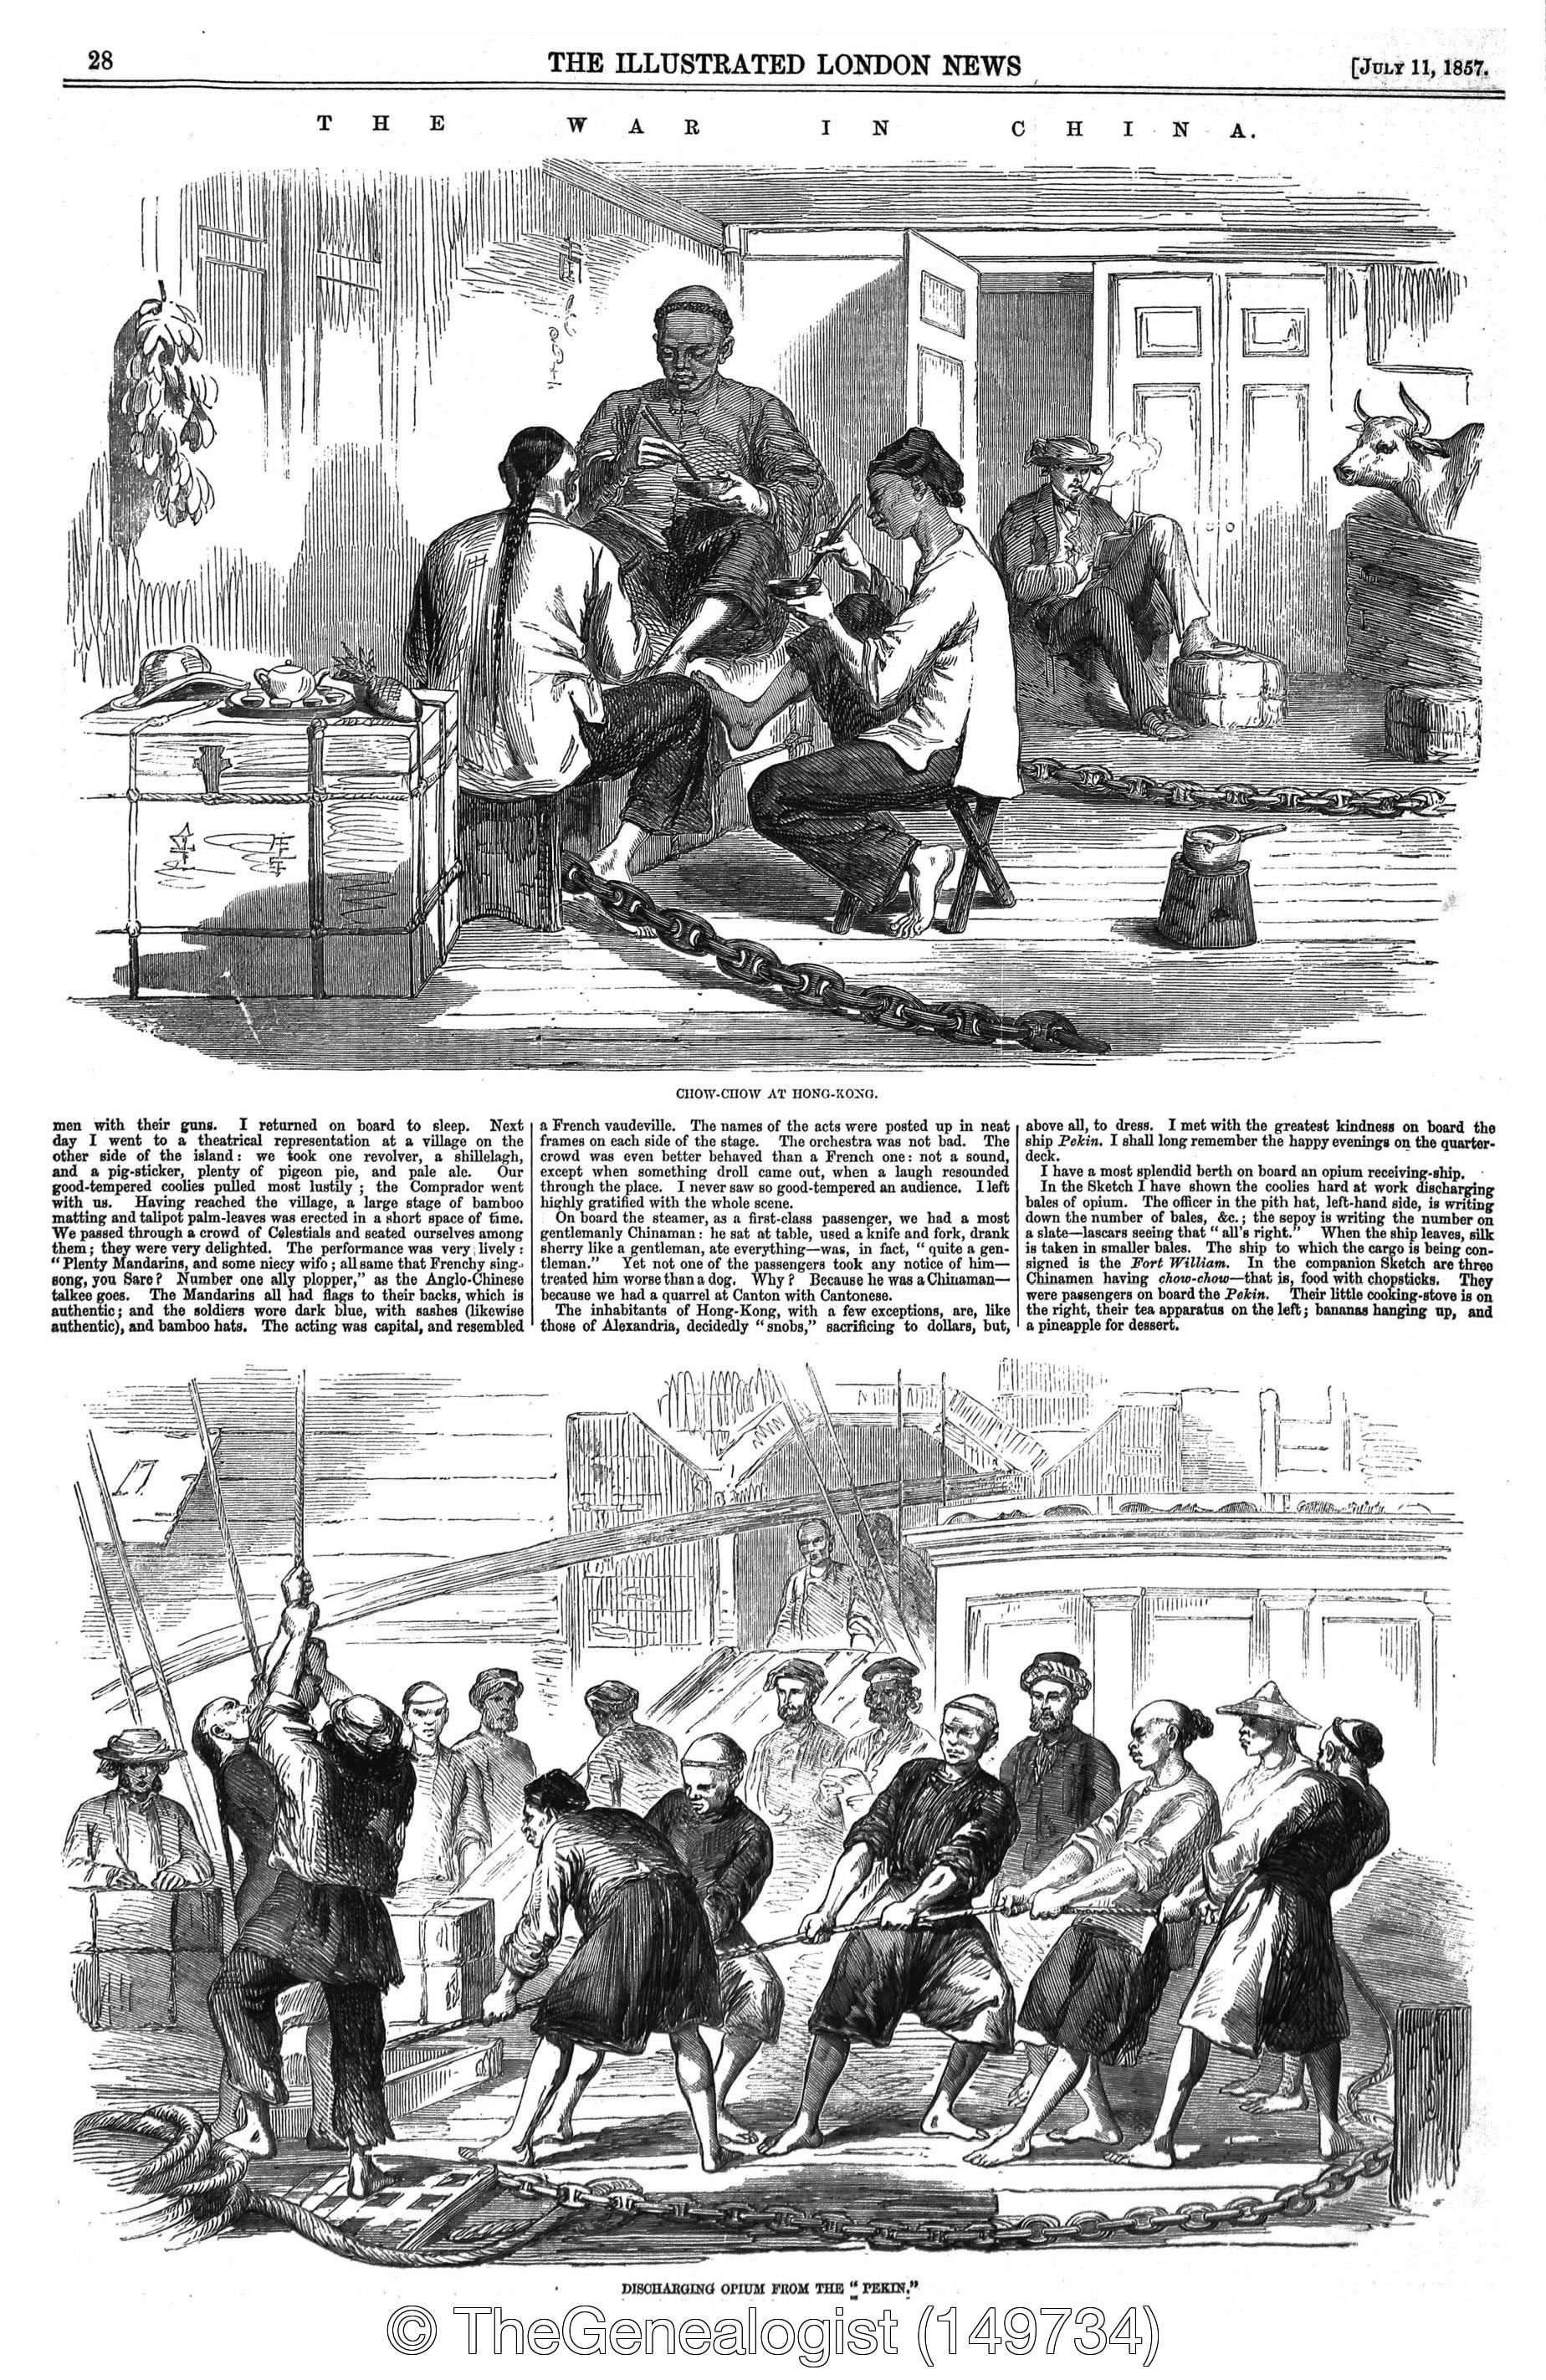 ILN July 1857 unloading opium in China from a British ship